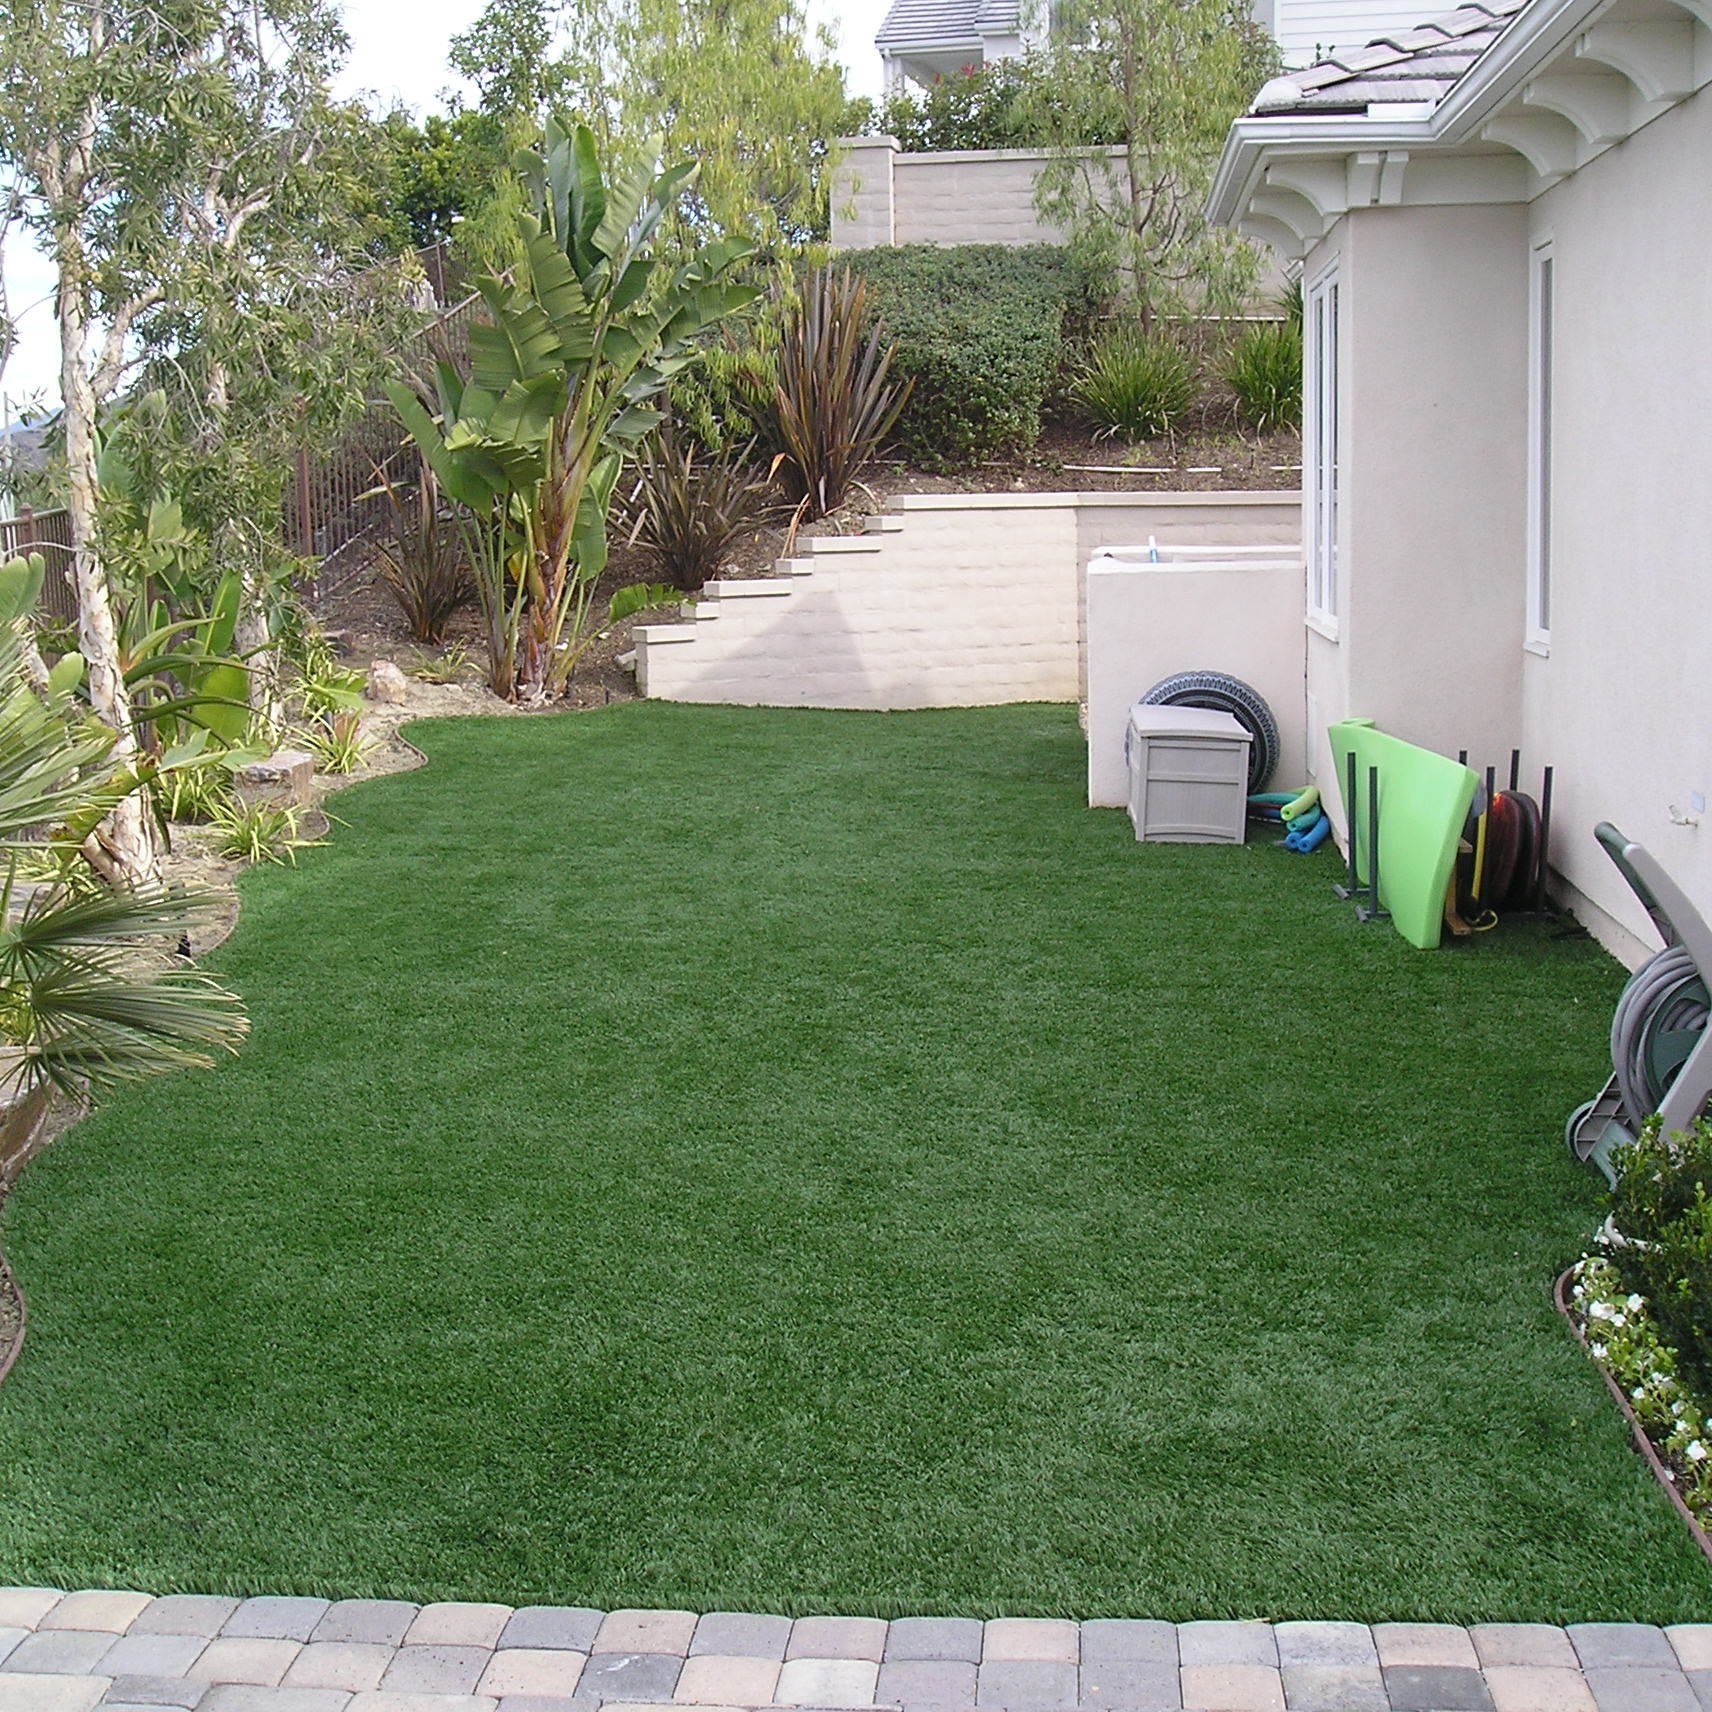 S Blade 50 most realistic artificial grass,realistic artificial grass